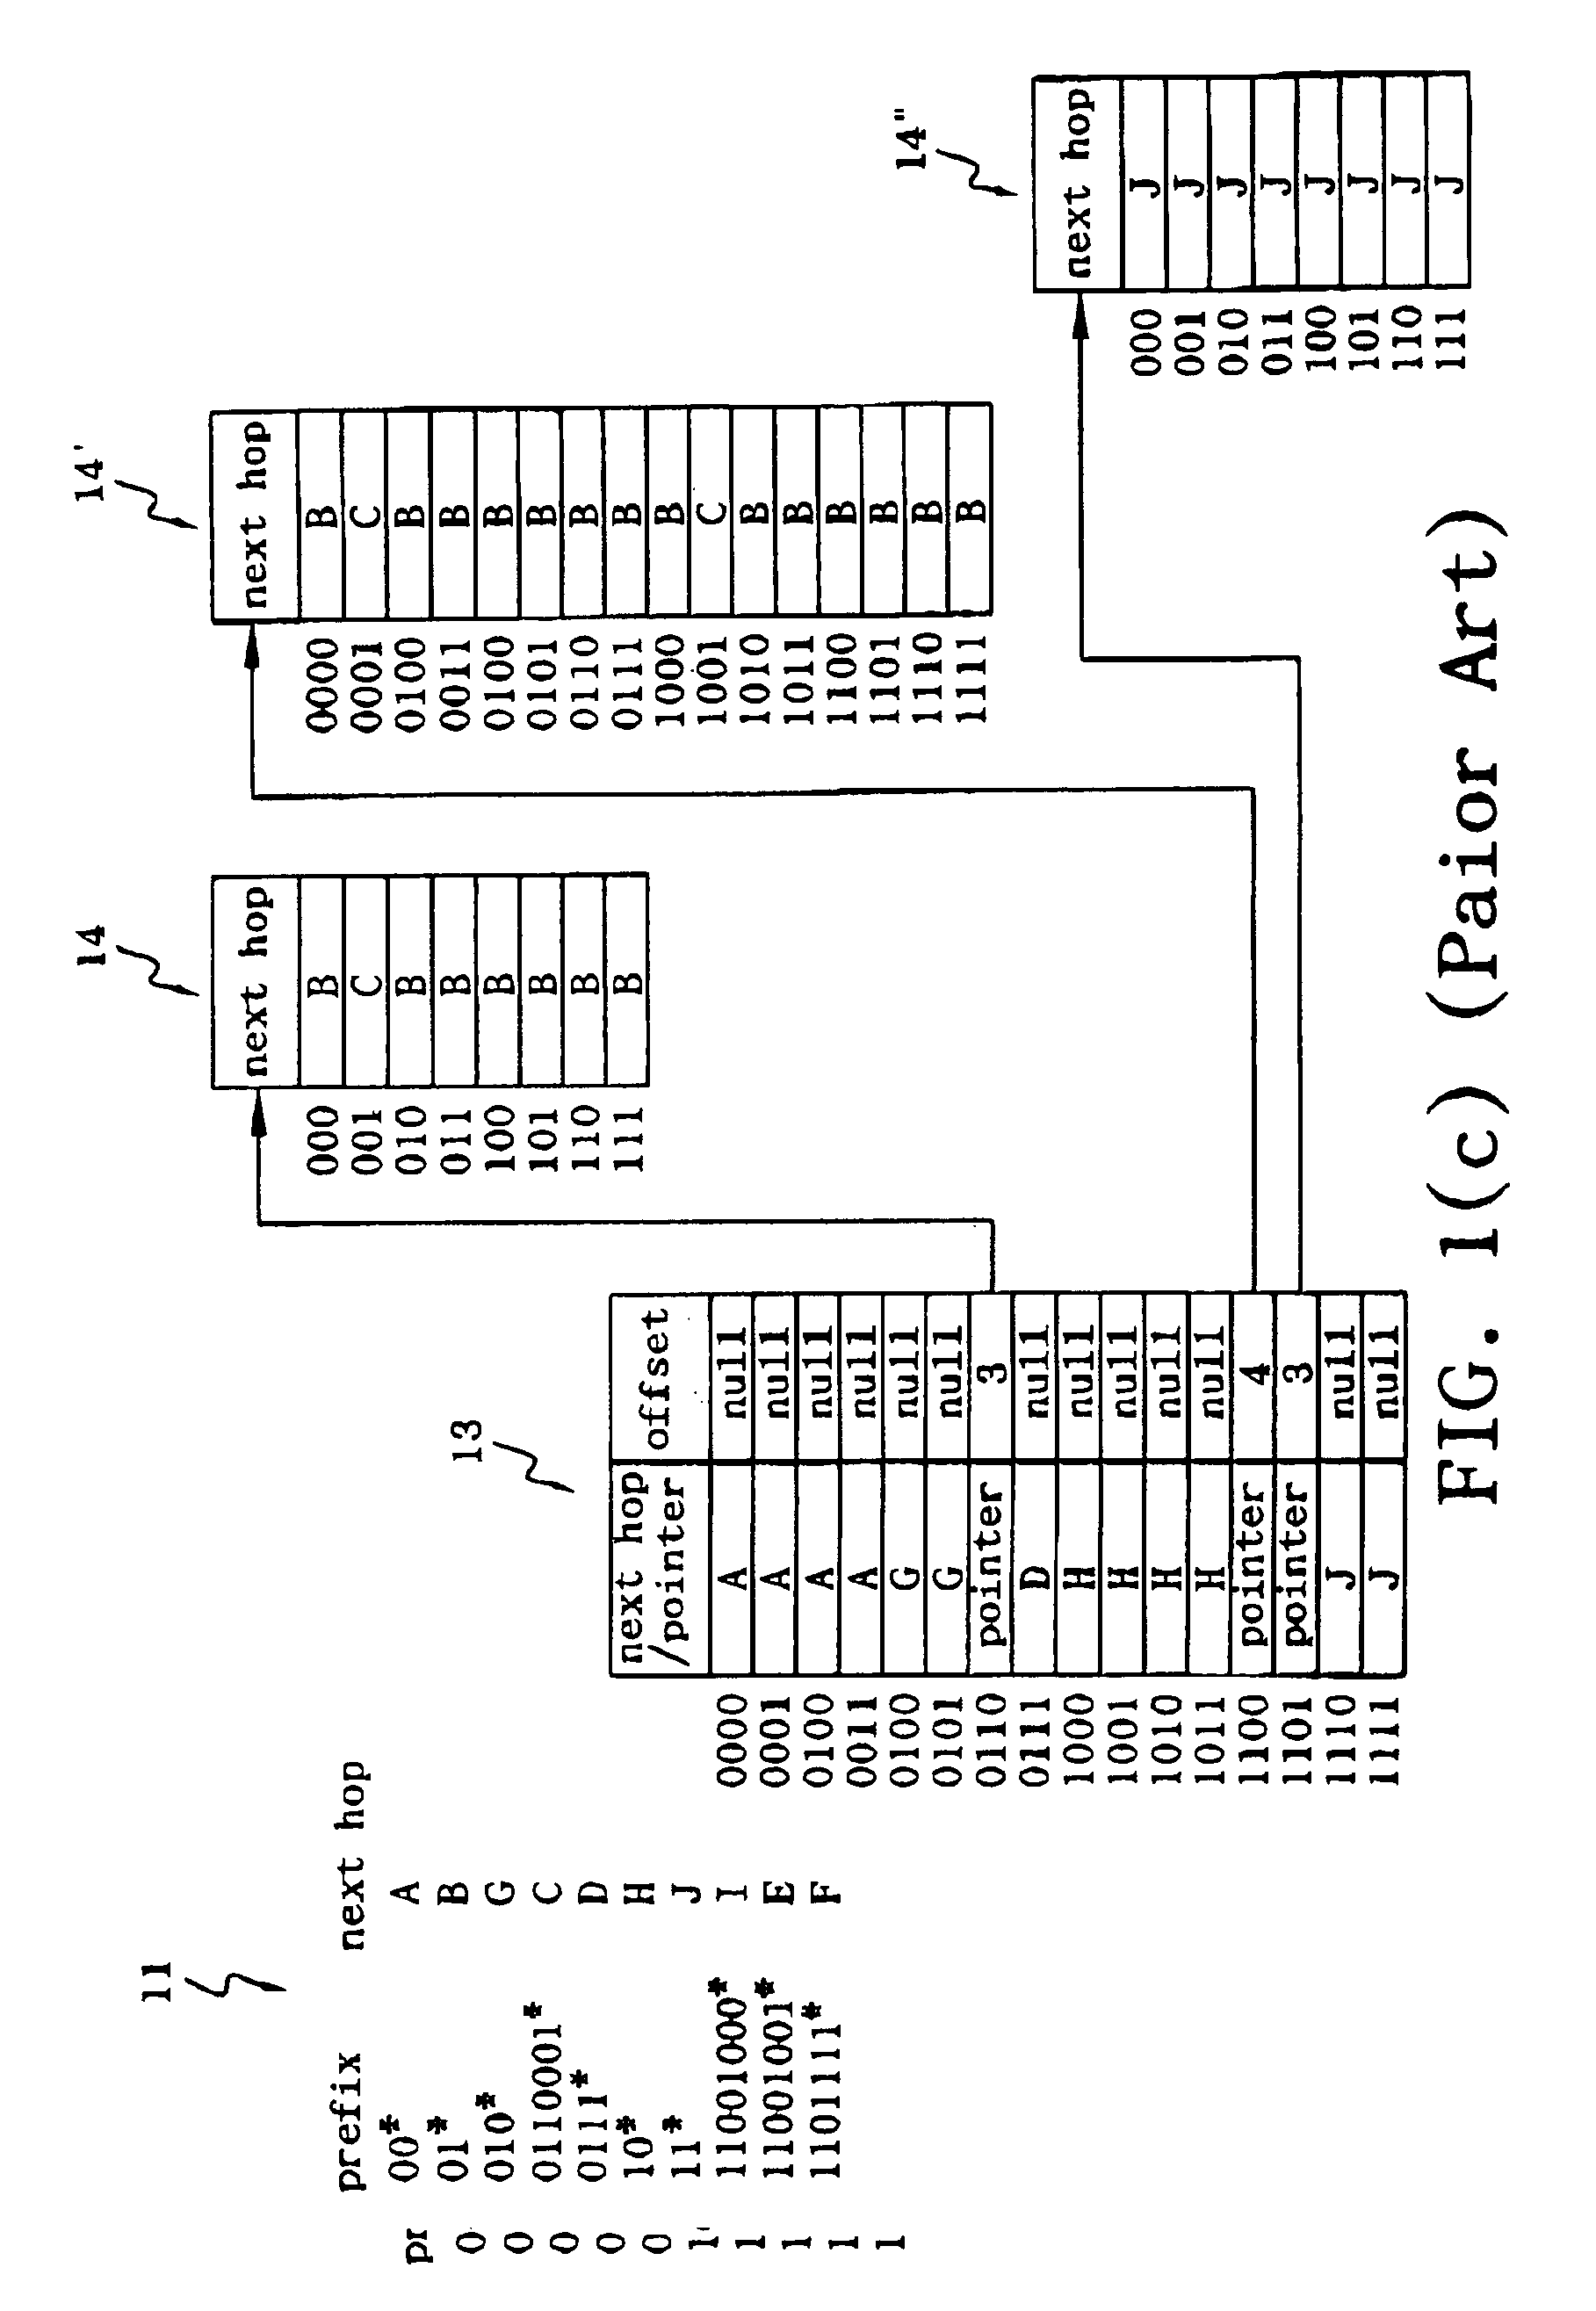 Method and apparatus for constructing and searching IP address